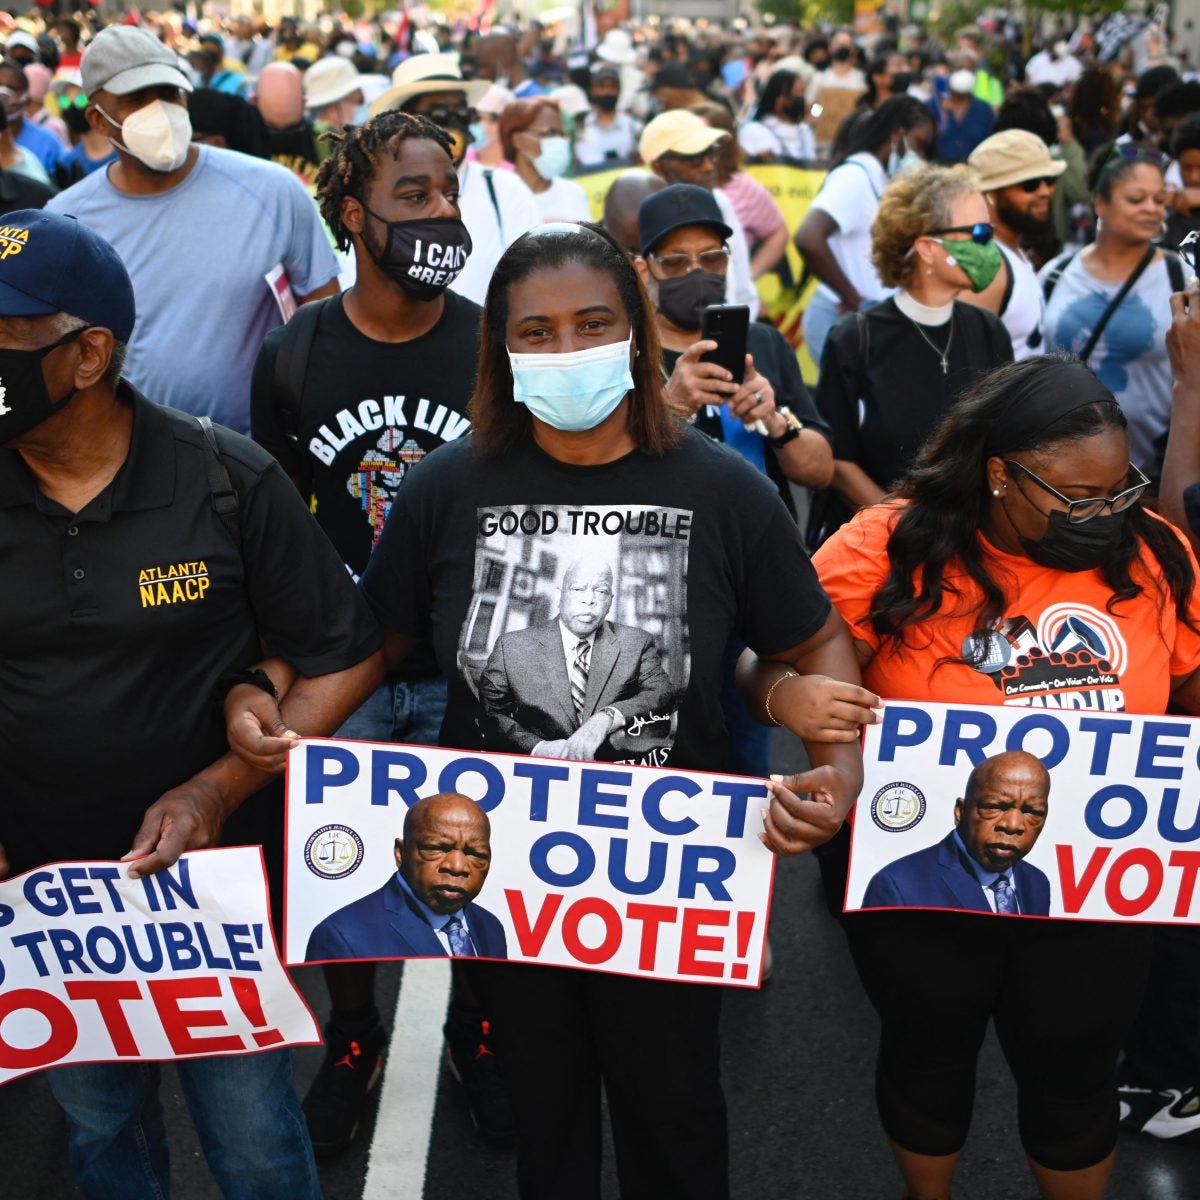 Thousands Join Voting Rights Marches, Rallies in DC and Nationwide